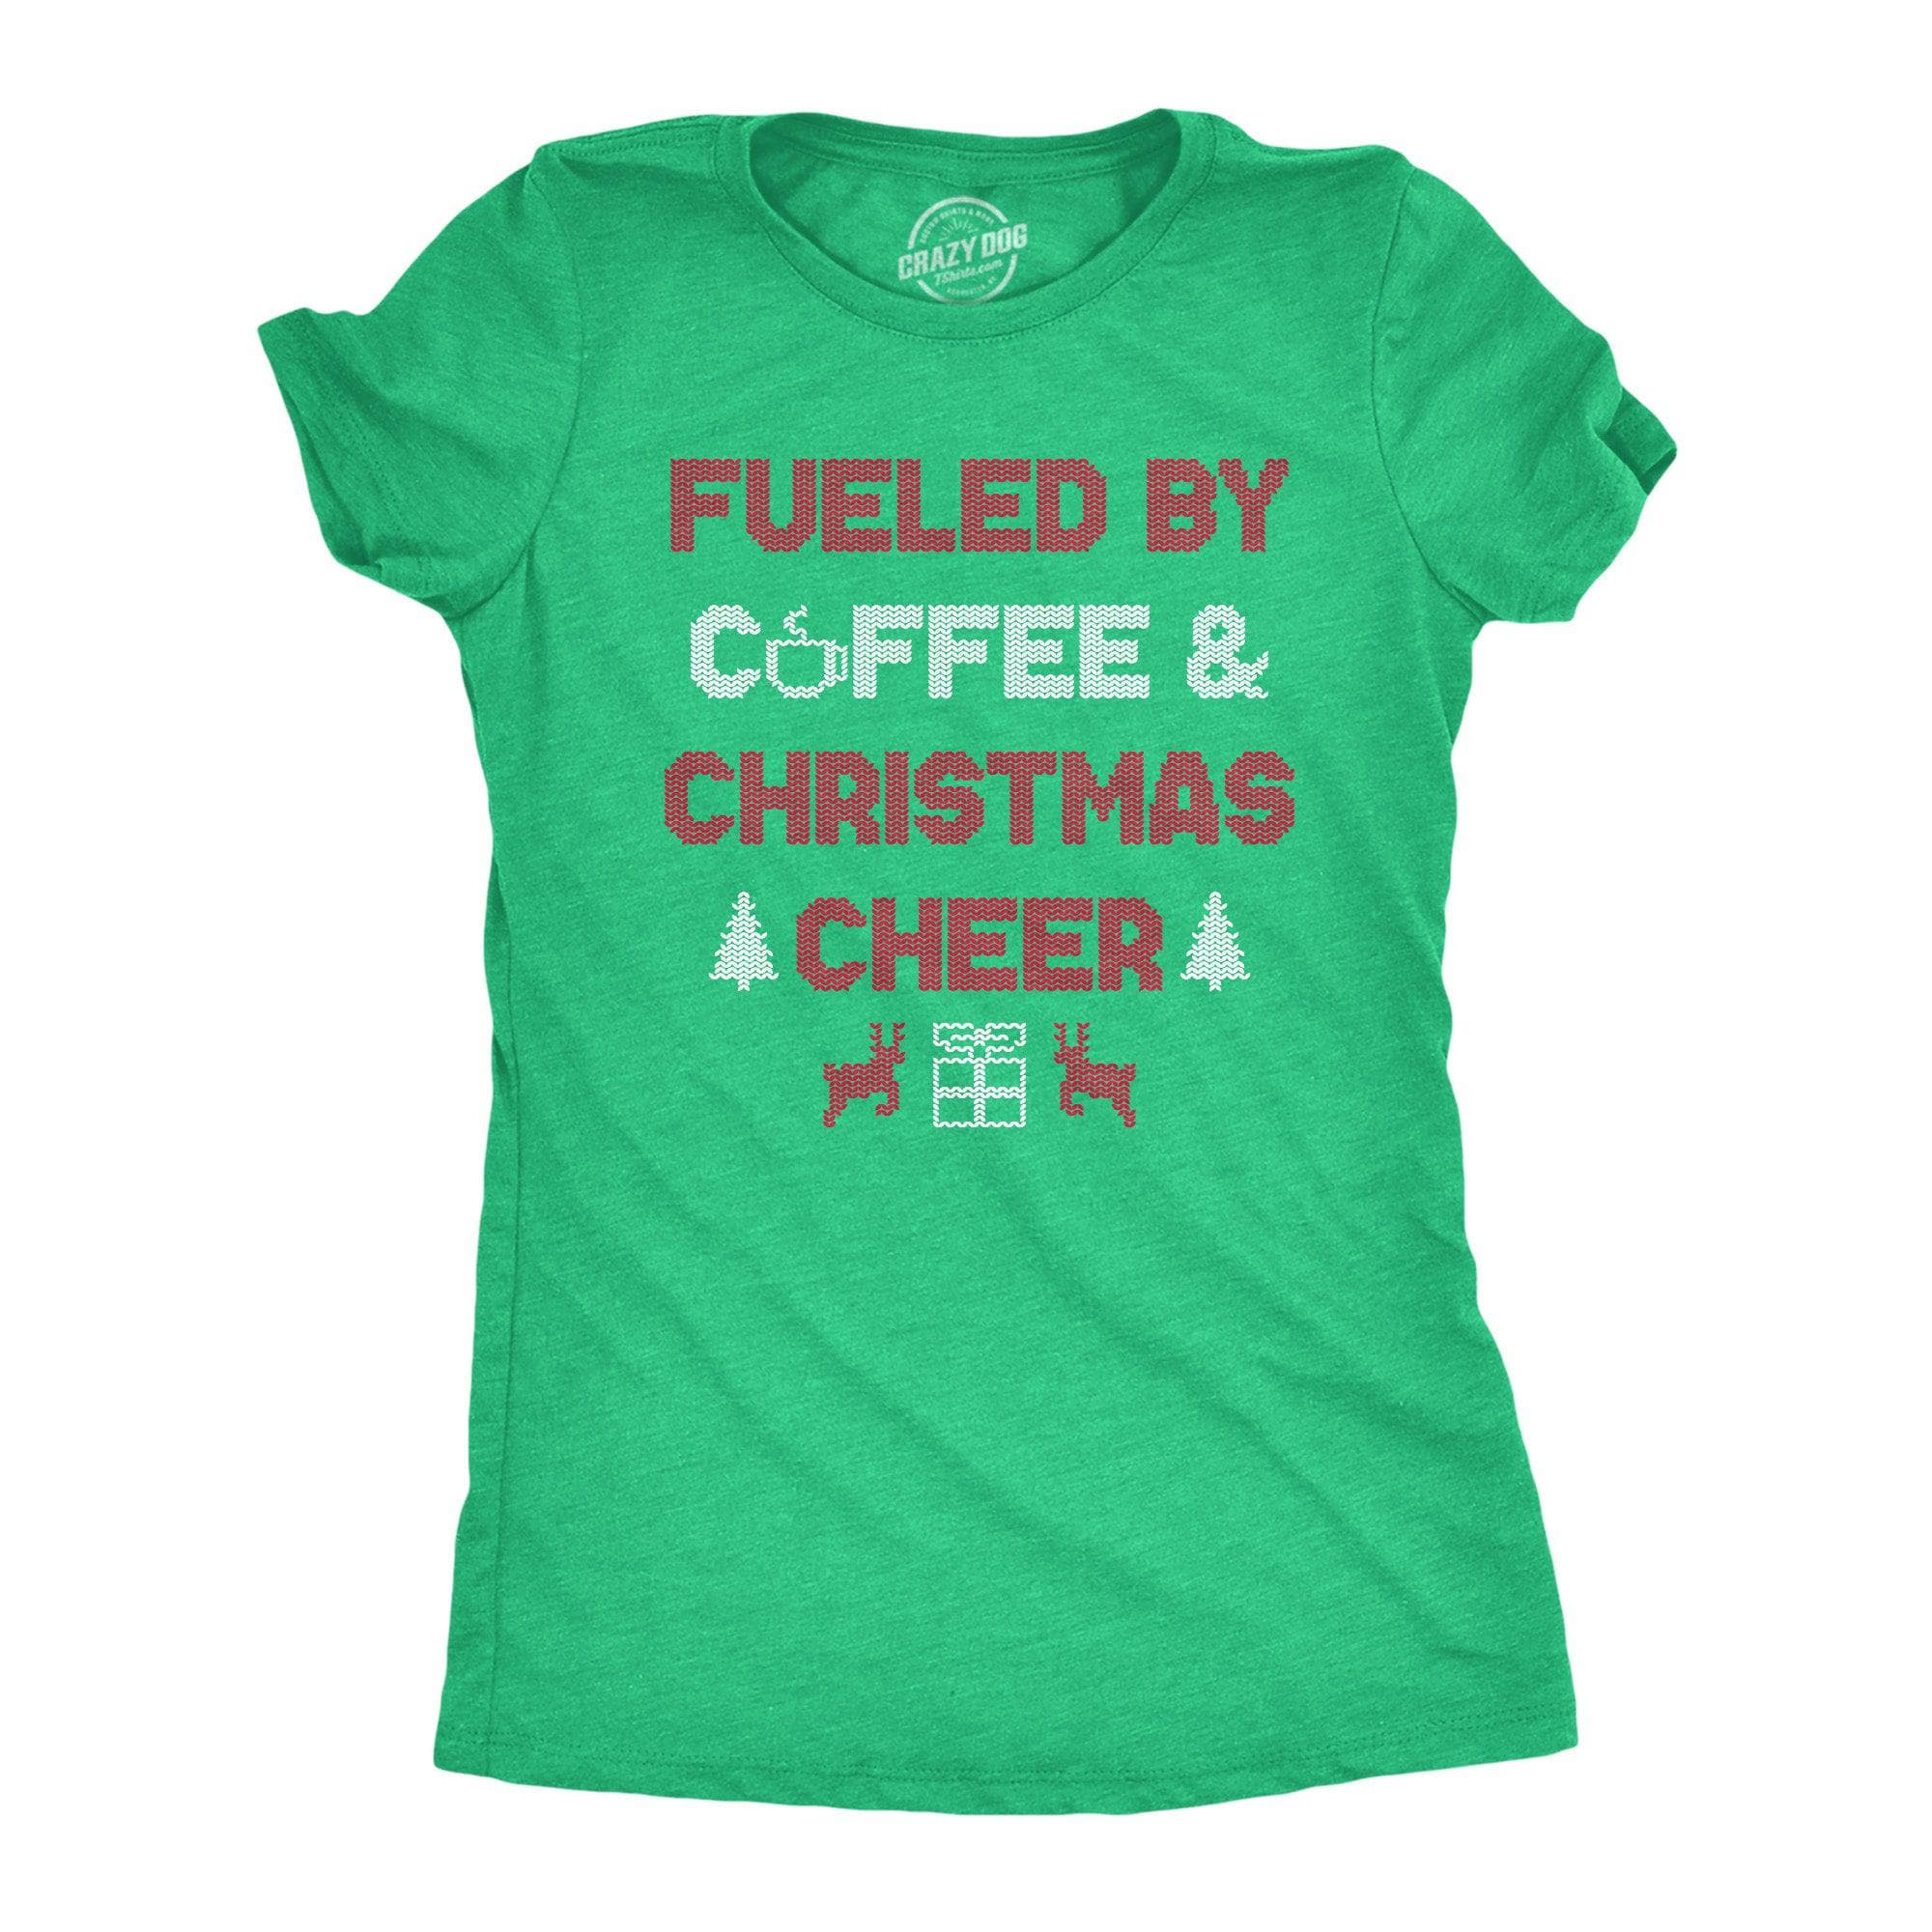 Fueled By Coffee And Christmas Cheer Women's Tshirt  -  Crazy Dog T-Shirts